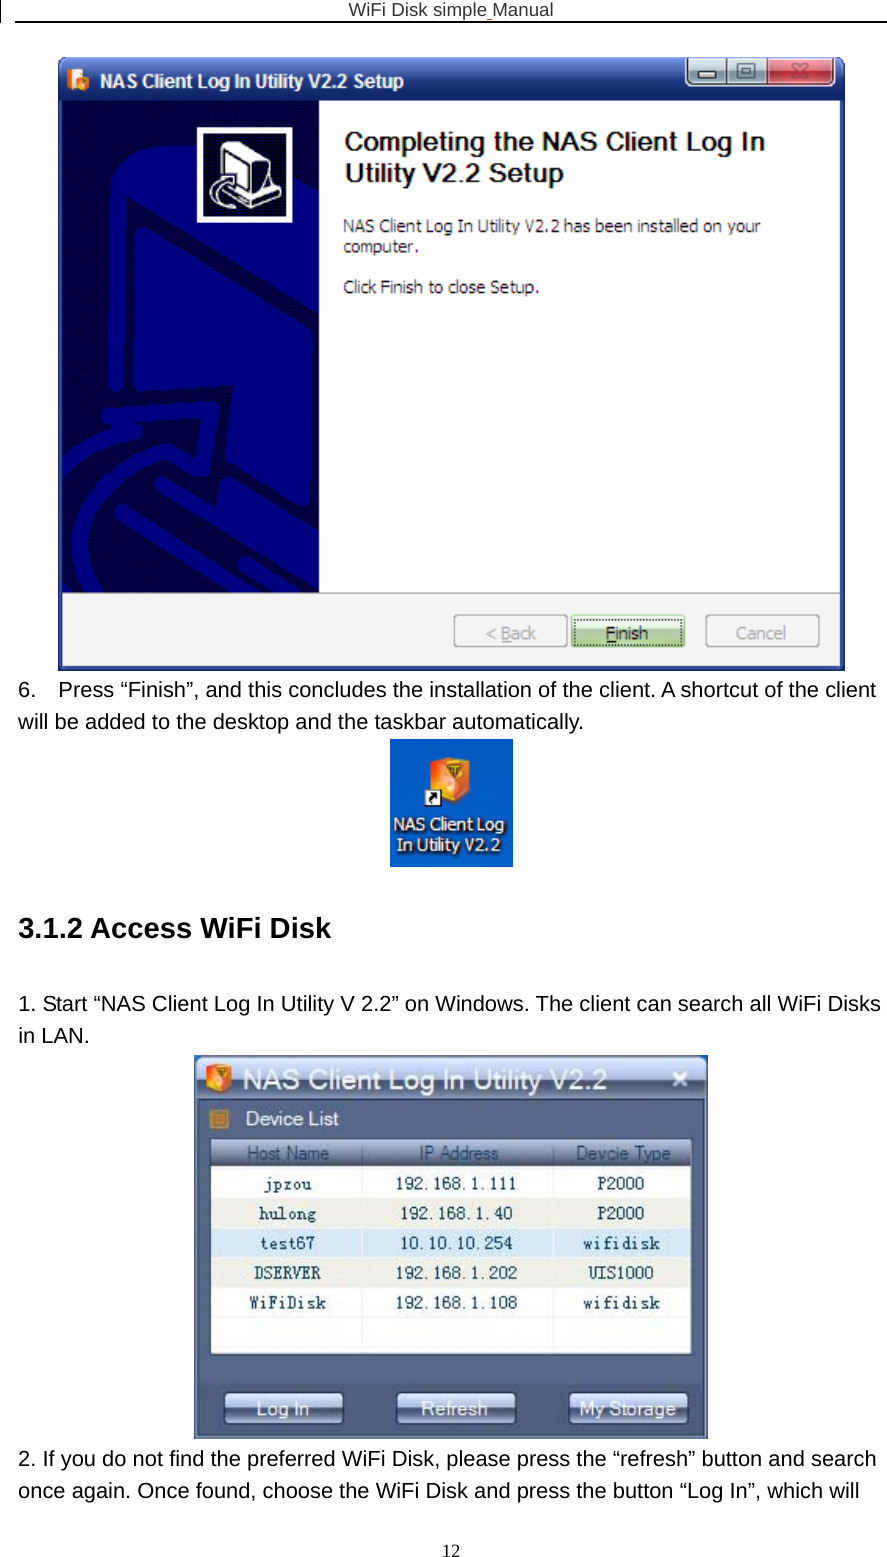 WiFi Disk simple Manual  12 6.    Press “Finish”, and this concludes the installation of the client. A shortcut of the client will be added to the desktop and the taskbar automatically.  3.1.2 Access WiFi Disk   1. Start “NAS Client Log In Utility V 2.2” on Windows. The client can search all WiFi Disks in LAN.  2. If you do not find the preferred WiFi Disk, please press the “refresh” button and search once again. Once found, choose the WiFi Disk and press the button “Log In”, which will 